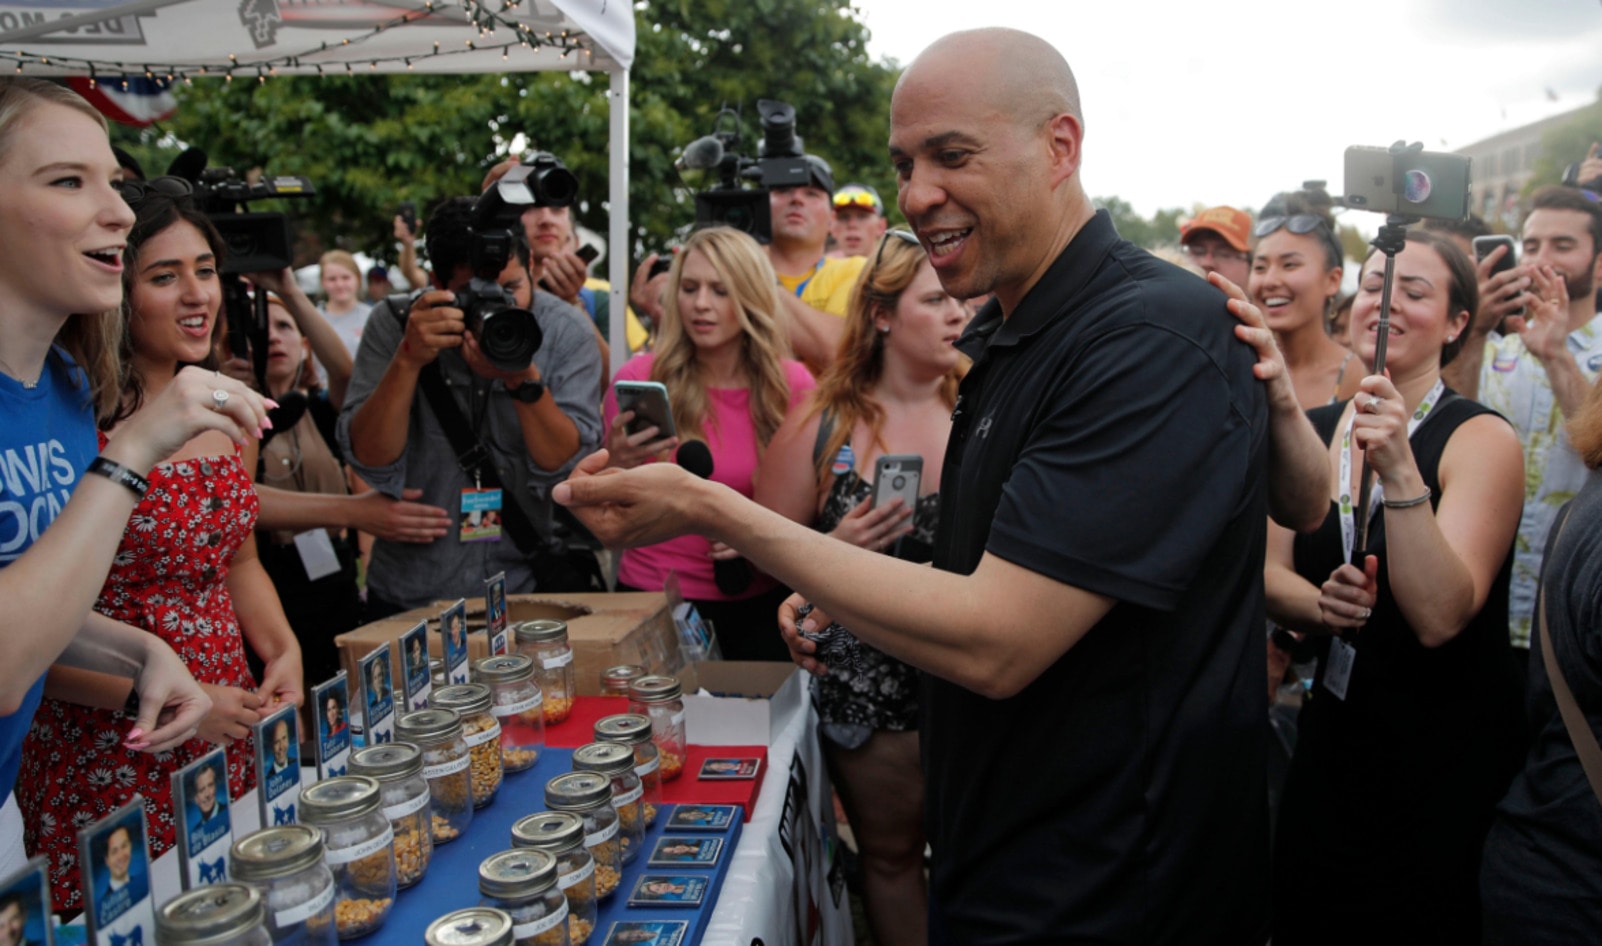 Cory Booker Uncovers the Best Vegan Snack at Iowa State Fair&nbsp;